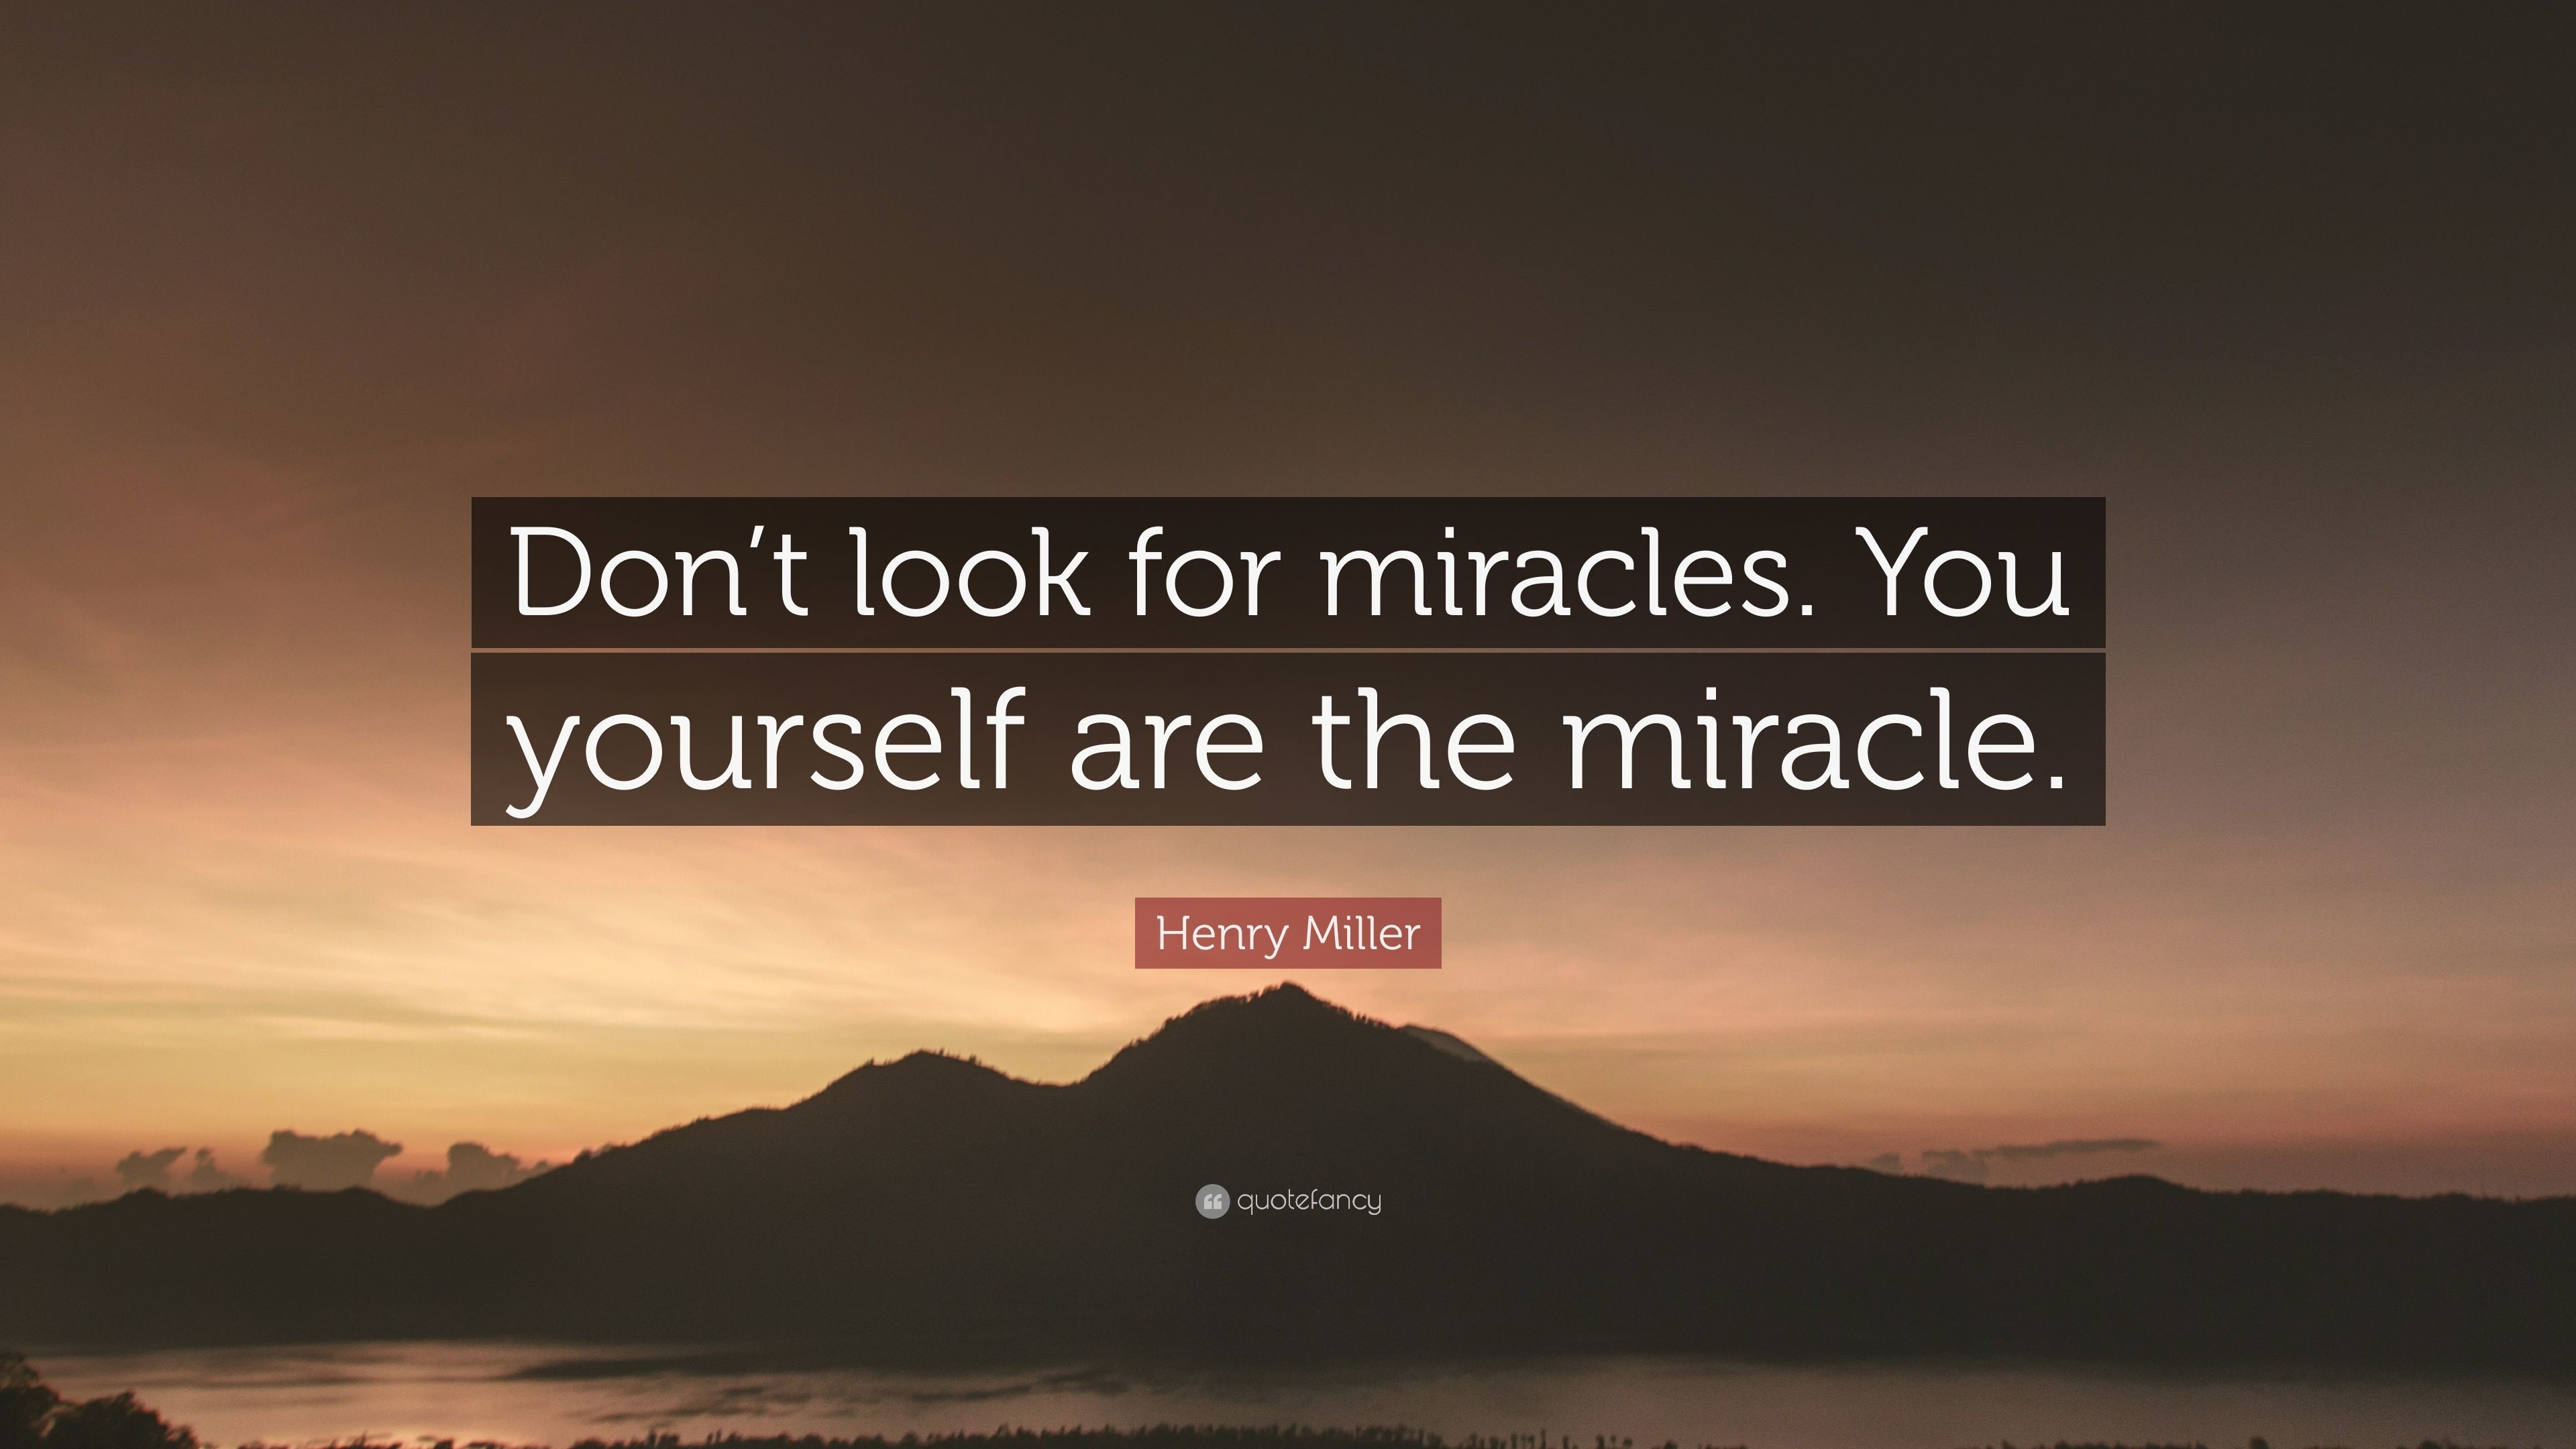 3840x2160 Henry Miller Quote: “Don't look for miracles. You yourself .